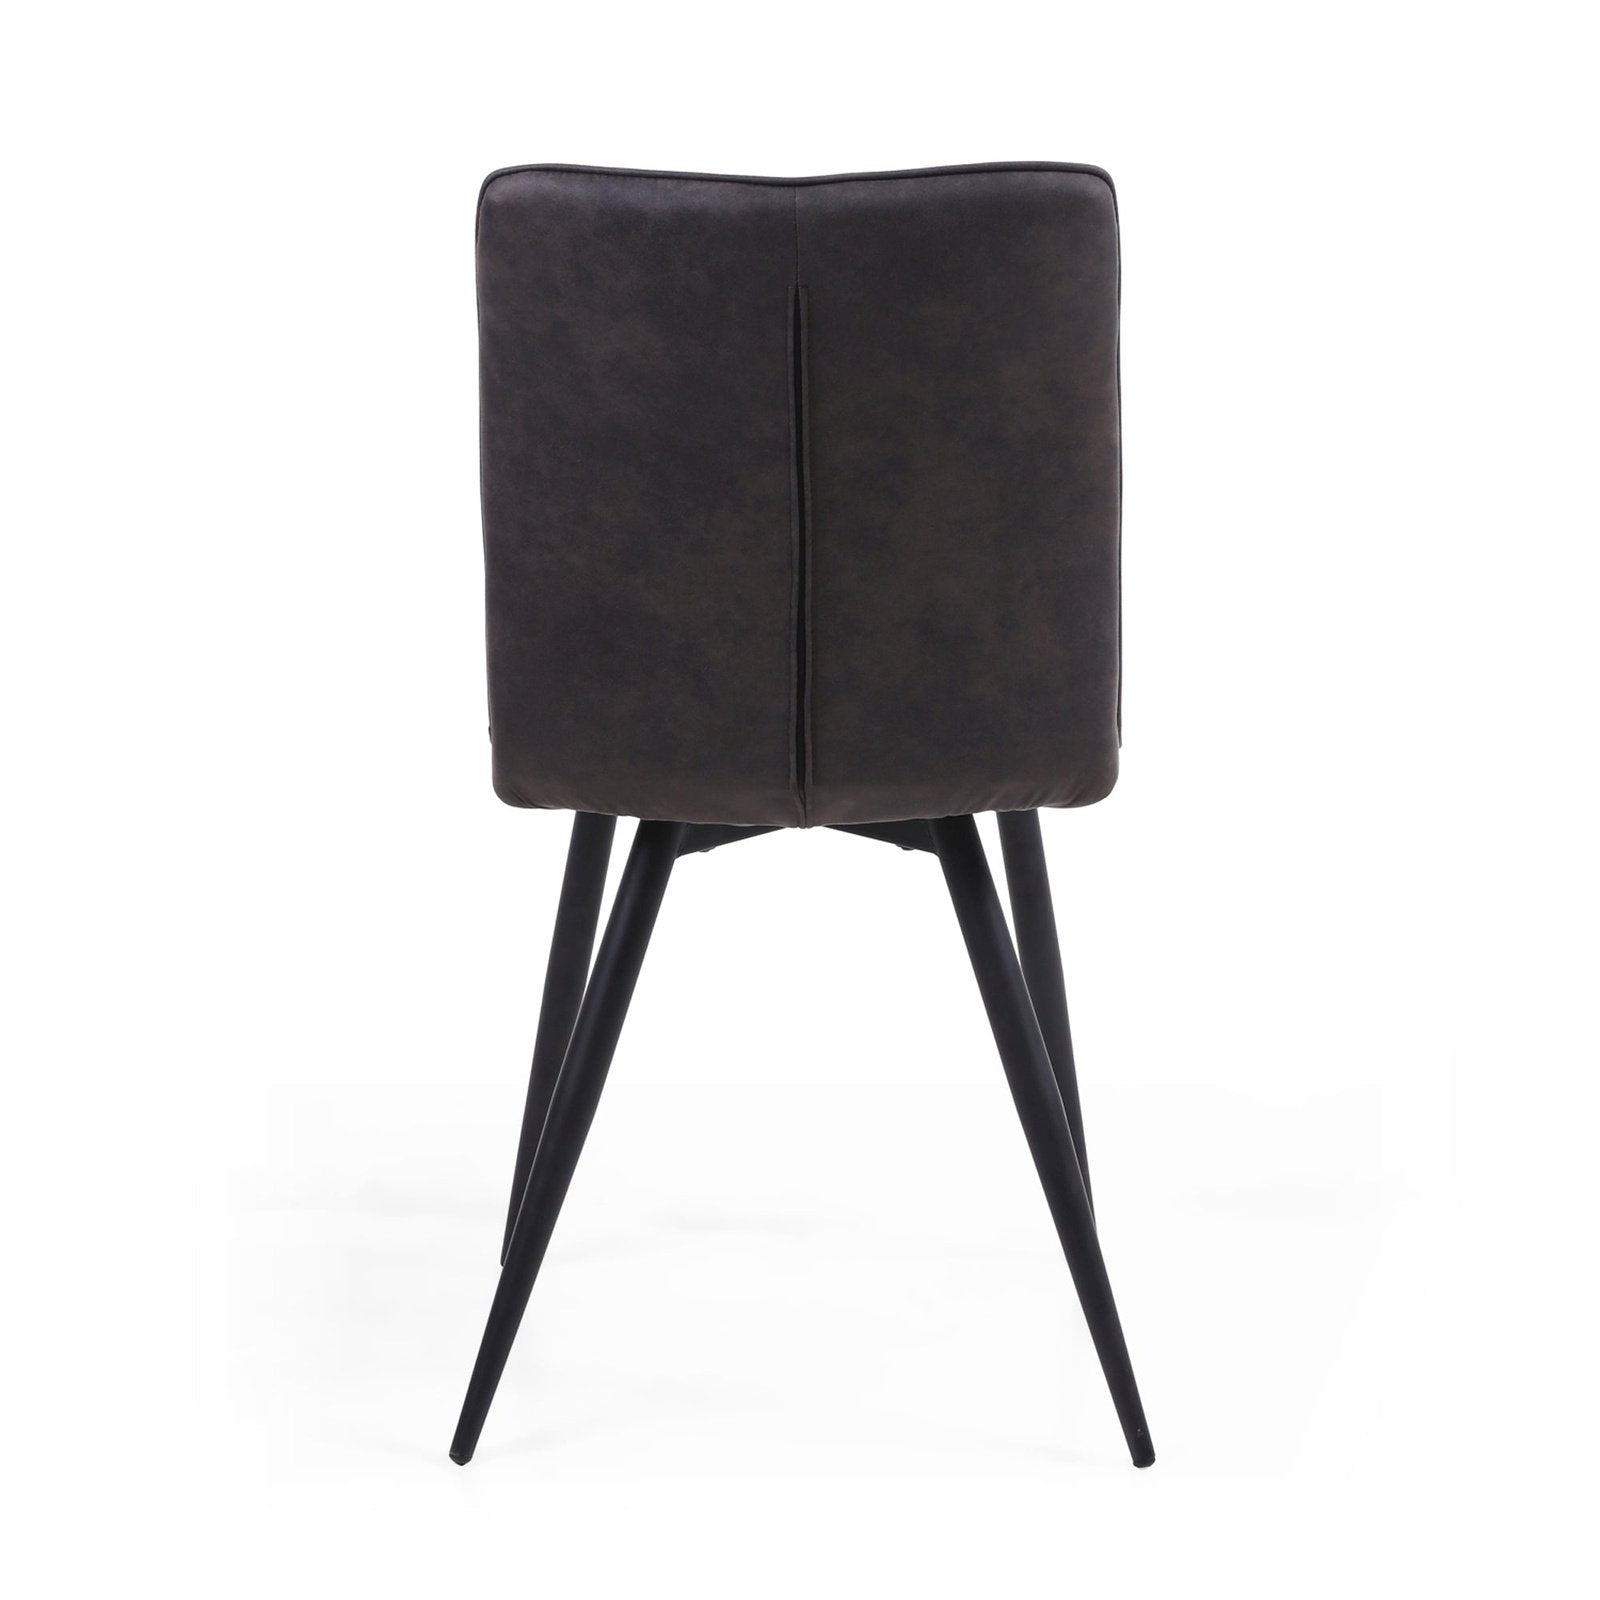 Rodeo Suede Effect Dining Chair